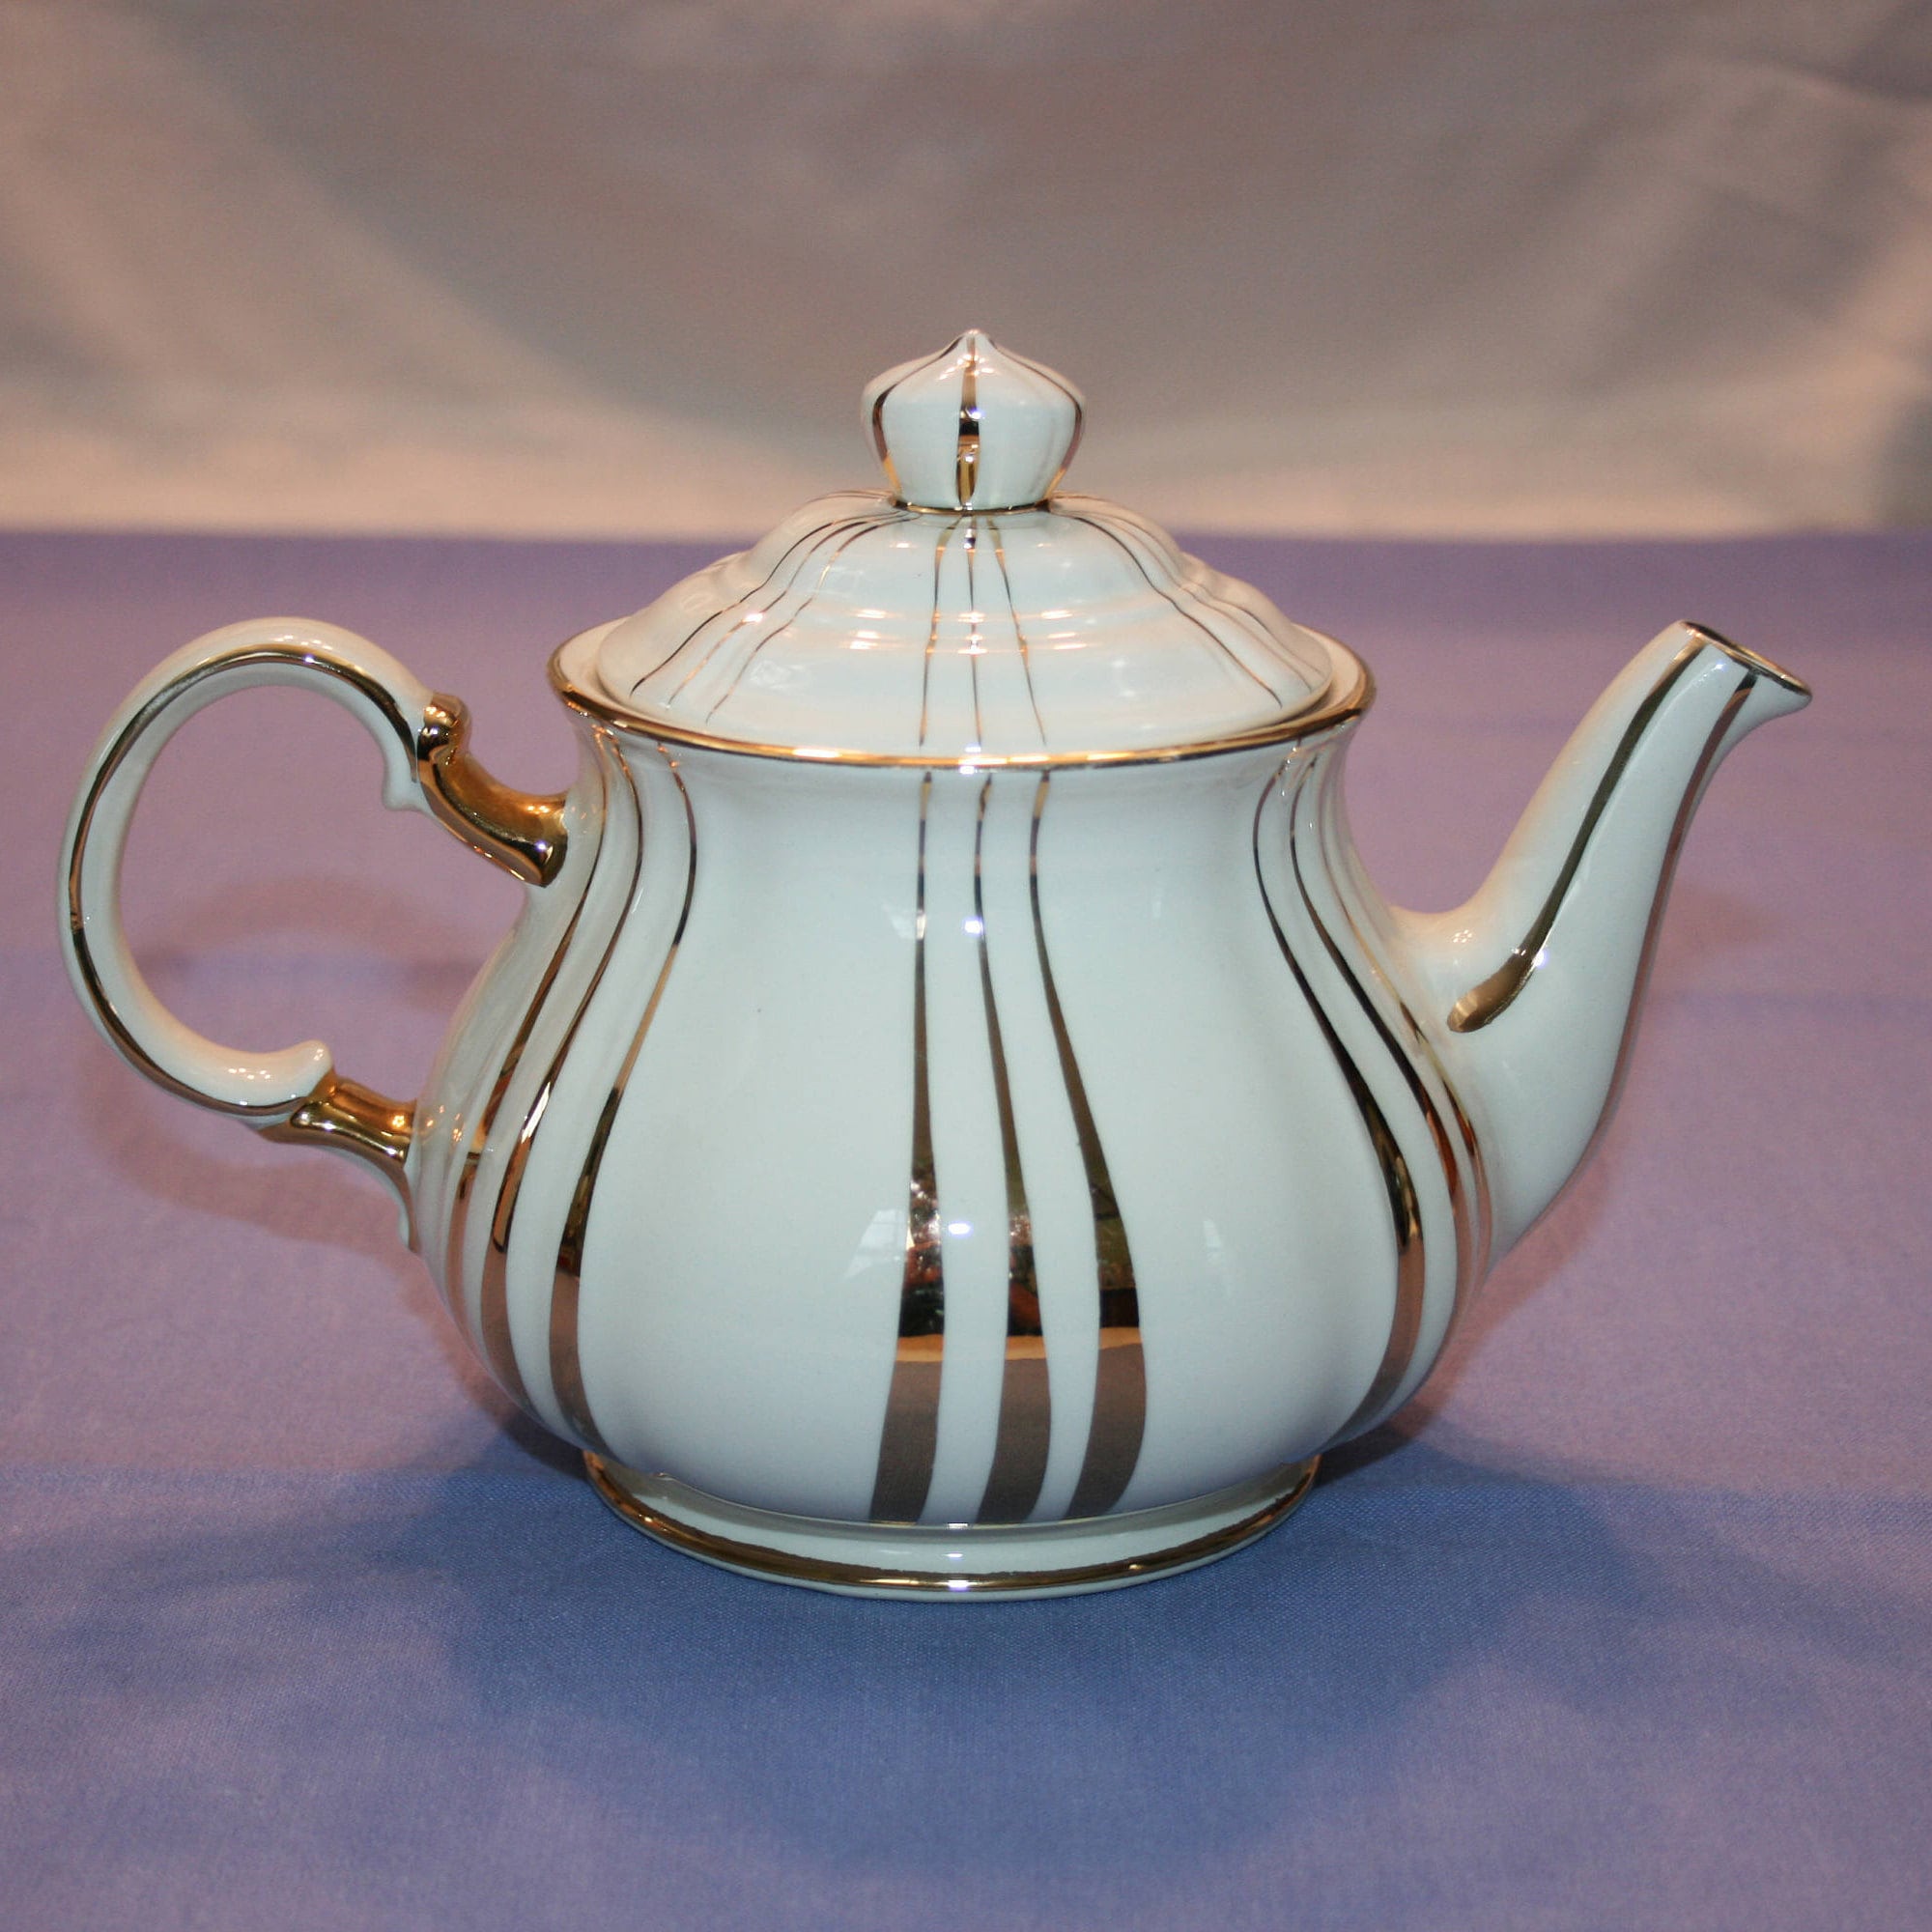 How Much Is My Sadler Teapot Worth